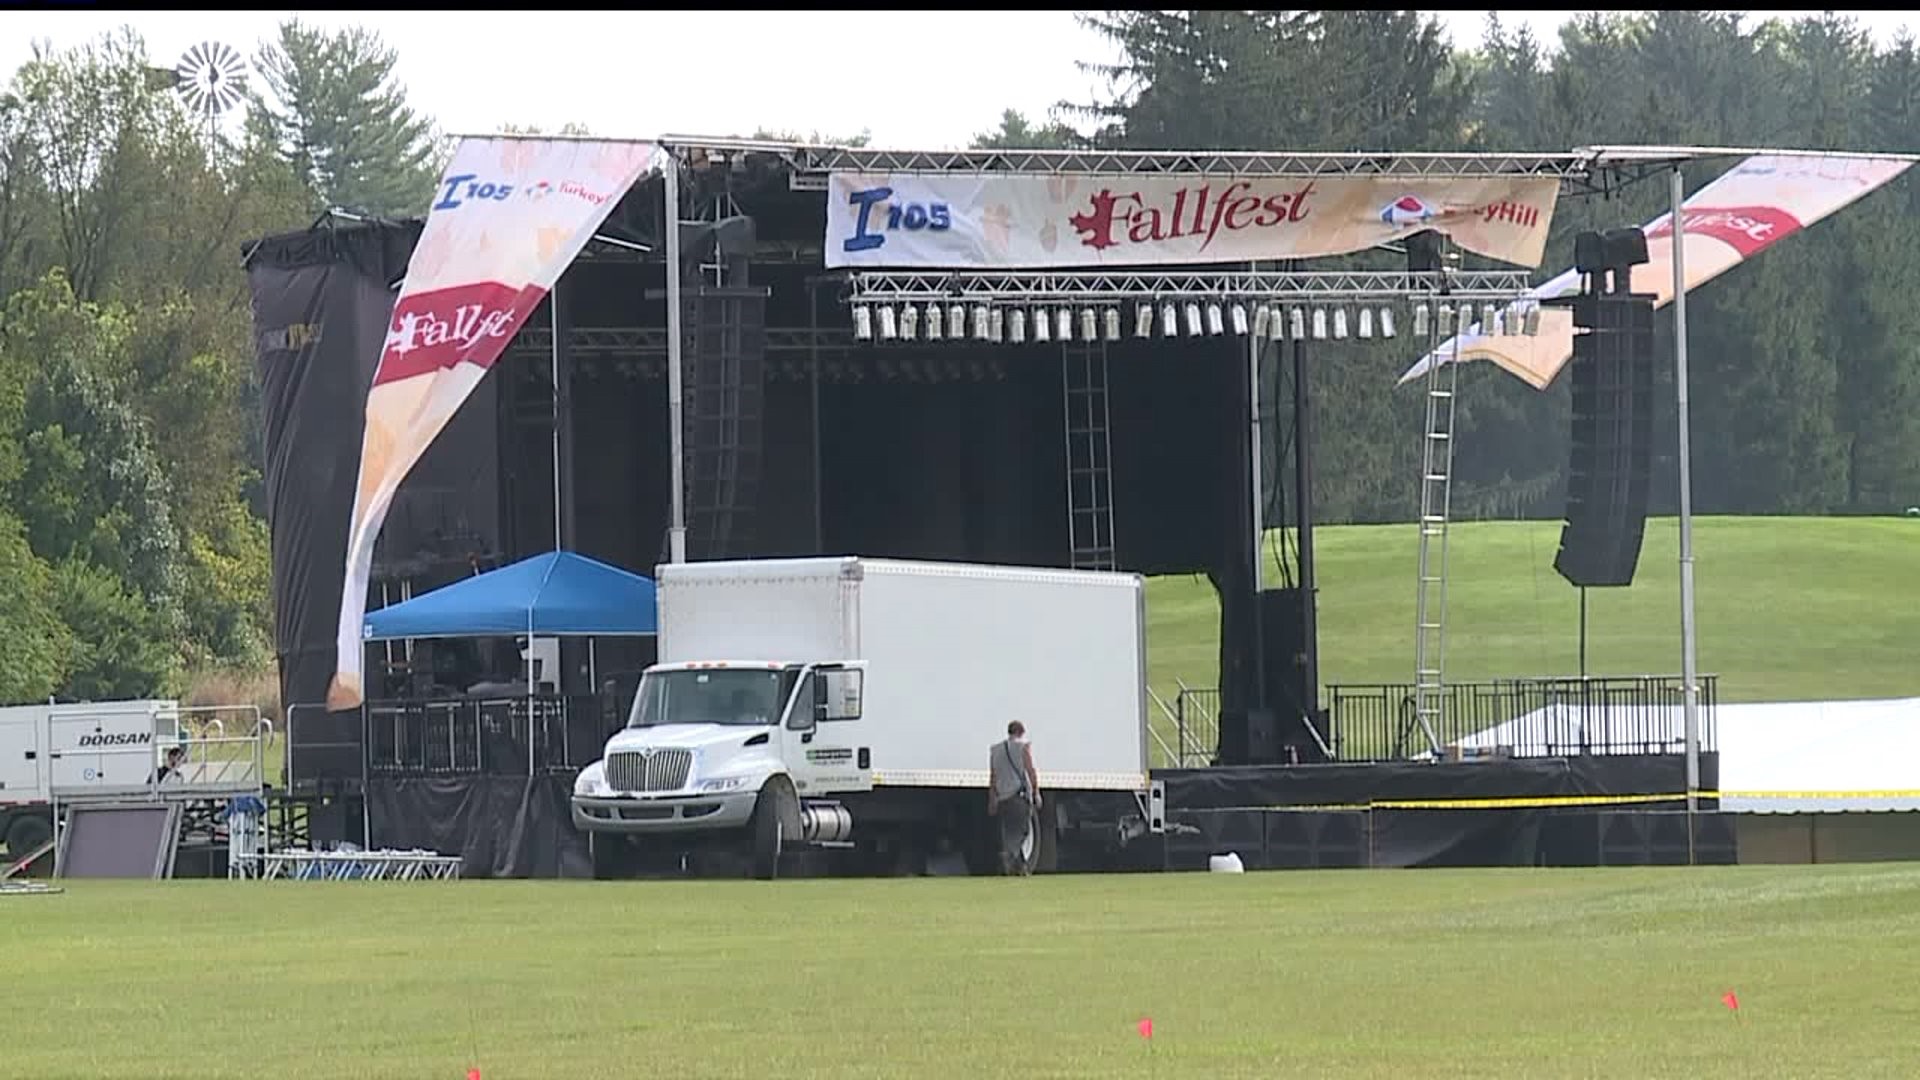 Police to put eyes on safety so FallFest fans keep ears on music